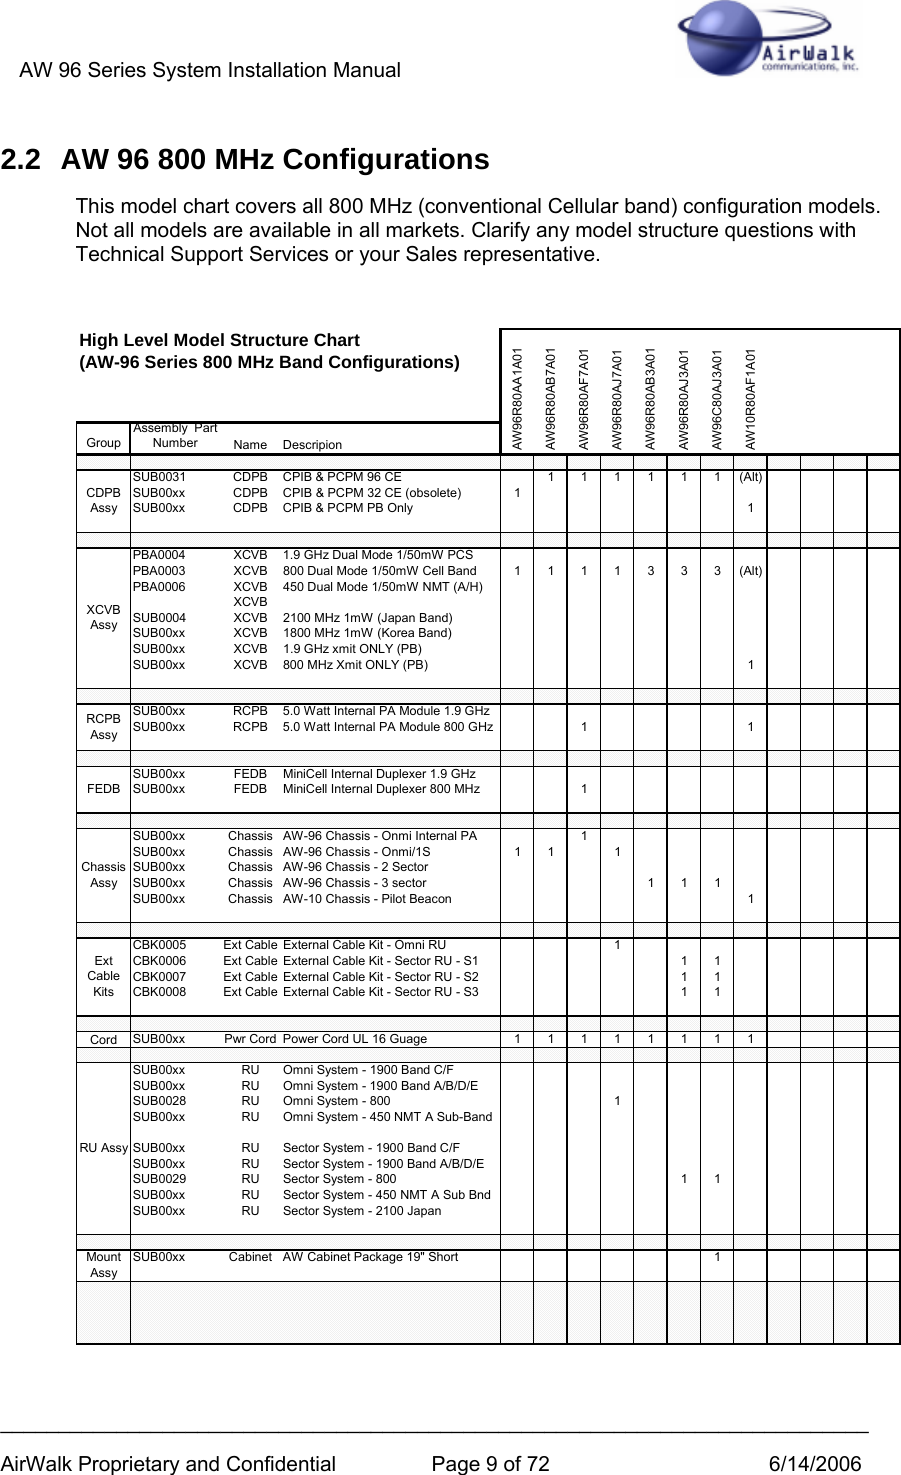 AW 96 Series System Installation Manual          ___________________________________________________________________________ AirWalk Proprietary and Confidential  Page 9 of 72  6/14/2006 2.2  AW 96 800 MHz Configurations This model chart covers all 800 MHz (conventional Cellular band) configuration models. Not all models are available in all markets. Clarify any model structure questions with Technical Support Services or your Sales representative.  GroupAssembly  Part Number Name DescripionSUB0031 CDPB CPIB &amp; PCPM 96 CE 1 1 1 1 1 1 (Alt)SUB00xx CDPB CPIB &amp; PCPM 32 CE (obsolete) 1SUB00xx CDPB CPIB &amp; PCPM PB Only 1PBA0004 XCVB 1.9 GHz Dual Mode 1/50mW PCSPBA0003 XCVB 800 Dual Mode 1/50mW Cell Band 1 1 1 1 3 3 3 (Alt)PBA0006 XCVB 450 Dual Mode 1/50mW NMT (A/H)XCVBSUB0004 XCVB 2100 MHz 1mW (Japan Band)SUB00xx XCVB 1800 MHz 1mW (Korea Band)SUB00xx XCVB 1.9 GHz xmit ONLY (PB)SUB00xx XCVB 800 MHz Xmit ONLY (PB) 1SUB00xx RCPB 5.0 Watt Internal PA Module 1.9 GHzSUB00xx RCPB 5.0 Watt Internal PA Module 800 GHz 1 1SUB00xx FEDB MiniCell Internal Duplexer 1.9 GHzSUB00xx FEDB MiniCell Internal Duplexer 800 MHz 1SUB00xx Chassis AW-96 Chassis - Onmi Internal PA 1SUB00xx Chassis AW-96 Chassis - Onmi/1S 1 1 1SUB00xx Chassis AW-96 Chassis - 2 SectorSUB00xx Chassis AW-96 Chassis - 3 sector 1 1 1SUB00xx Chassis AW-10 Chassis - Pilot Beacon 1CBK0005 Ext Cable External Cable Kit - Omni RU 1CBK0006 Ext Cable External Cable Kit - Sector RU - S1 1 1CBK0007 Ext Cable External Cable Kit - Sector RU - S2 1 1CBK0008 Ext Cable External Cable Kit - Sector RU - S3 1 1Cord SUB00xx Pwr Cord Power Cord UL 16 Guage 1 1 1 1 1 1 1 1SUB00xx RU Omni System - 1900 Band C/FSUB00xx RU Omni System - 1900 Band A/B/D/ESUB0028 RU Omni System - 800 1SUB00xx RU Omni System - 450 NMT A Sub-BandSUB00xx RU Sector System - 1900 Band C/FSUB00xx RU Sector System - 1900 Band A/B/D/ESUB0029 RU Sector System - 800 1 1SUB00xx RU Sector System - 450 NMT A Sub BndSUB00xx RU Sector System - 2100 JapanSUB00xx Cabinet AW Cabinet Package 19&quot; Short 1XCVB AssyRCPB AssyChassis AssyFEDBCDPB AssyAW10R80AF1A01AW96R80AJ7A01AW96R80AB3A01AW96R80AJ3A01AW96C80AJ3A01High Level Model Structure Chart                            (AW-96 Series 800 MHz Band Configurations)AW96R80AA1A01AW96R80AB7A01AW96R80AF7A01Ext Cable KitsRU AssyMount Assy  